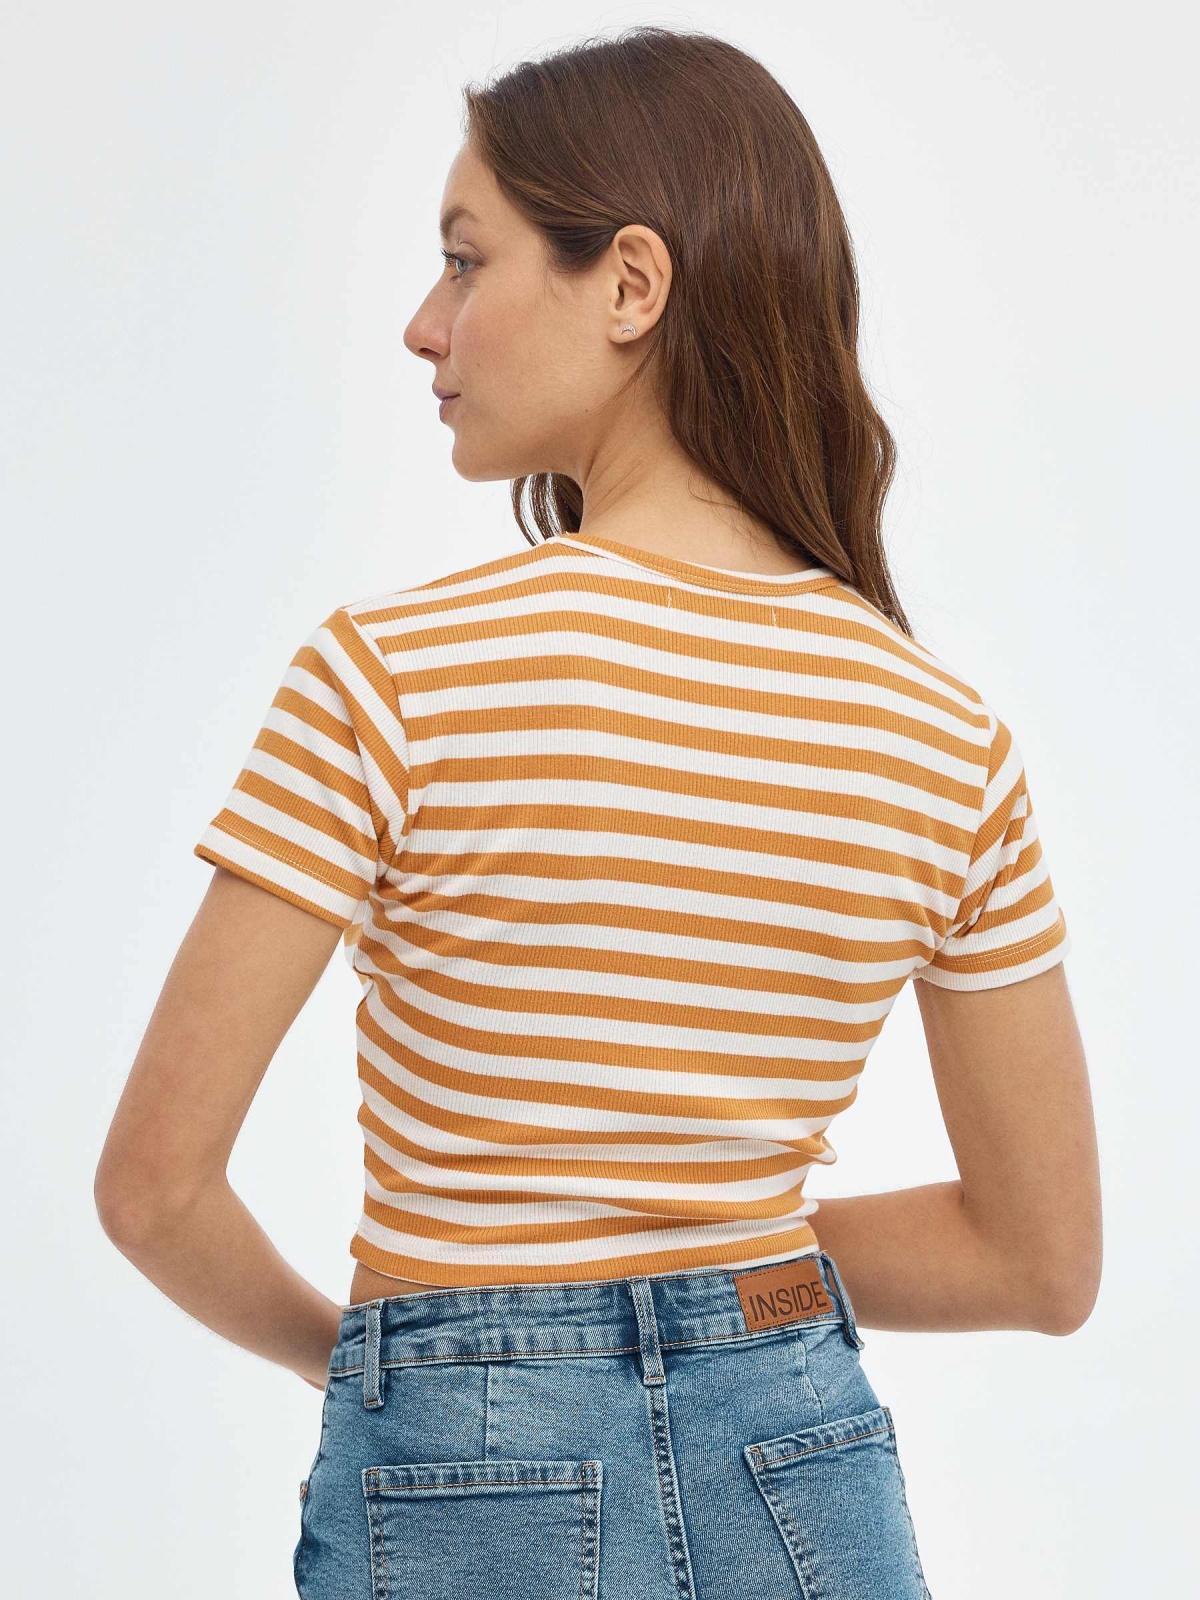 Striped crop top brown middle back view